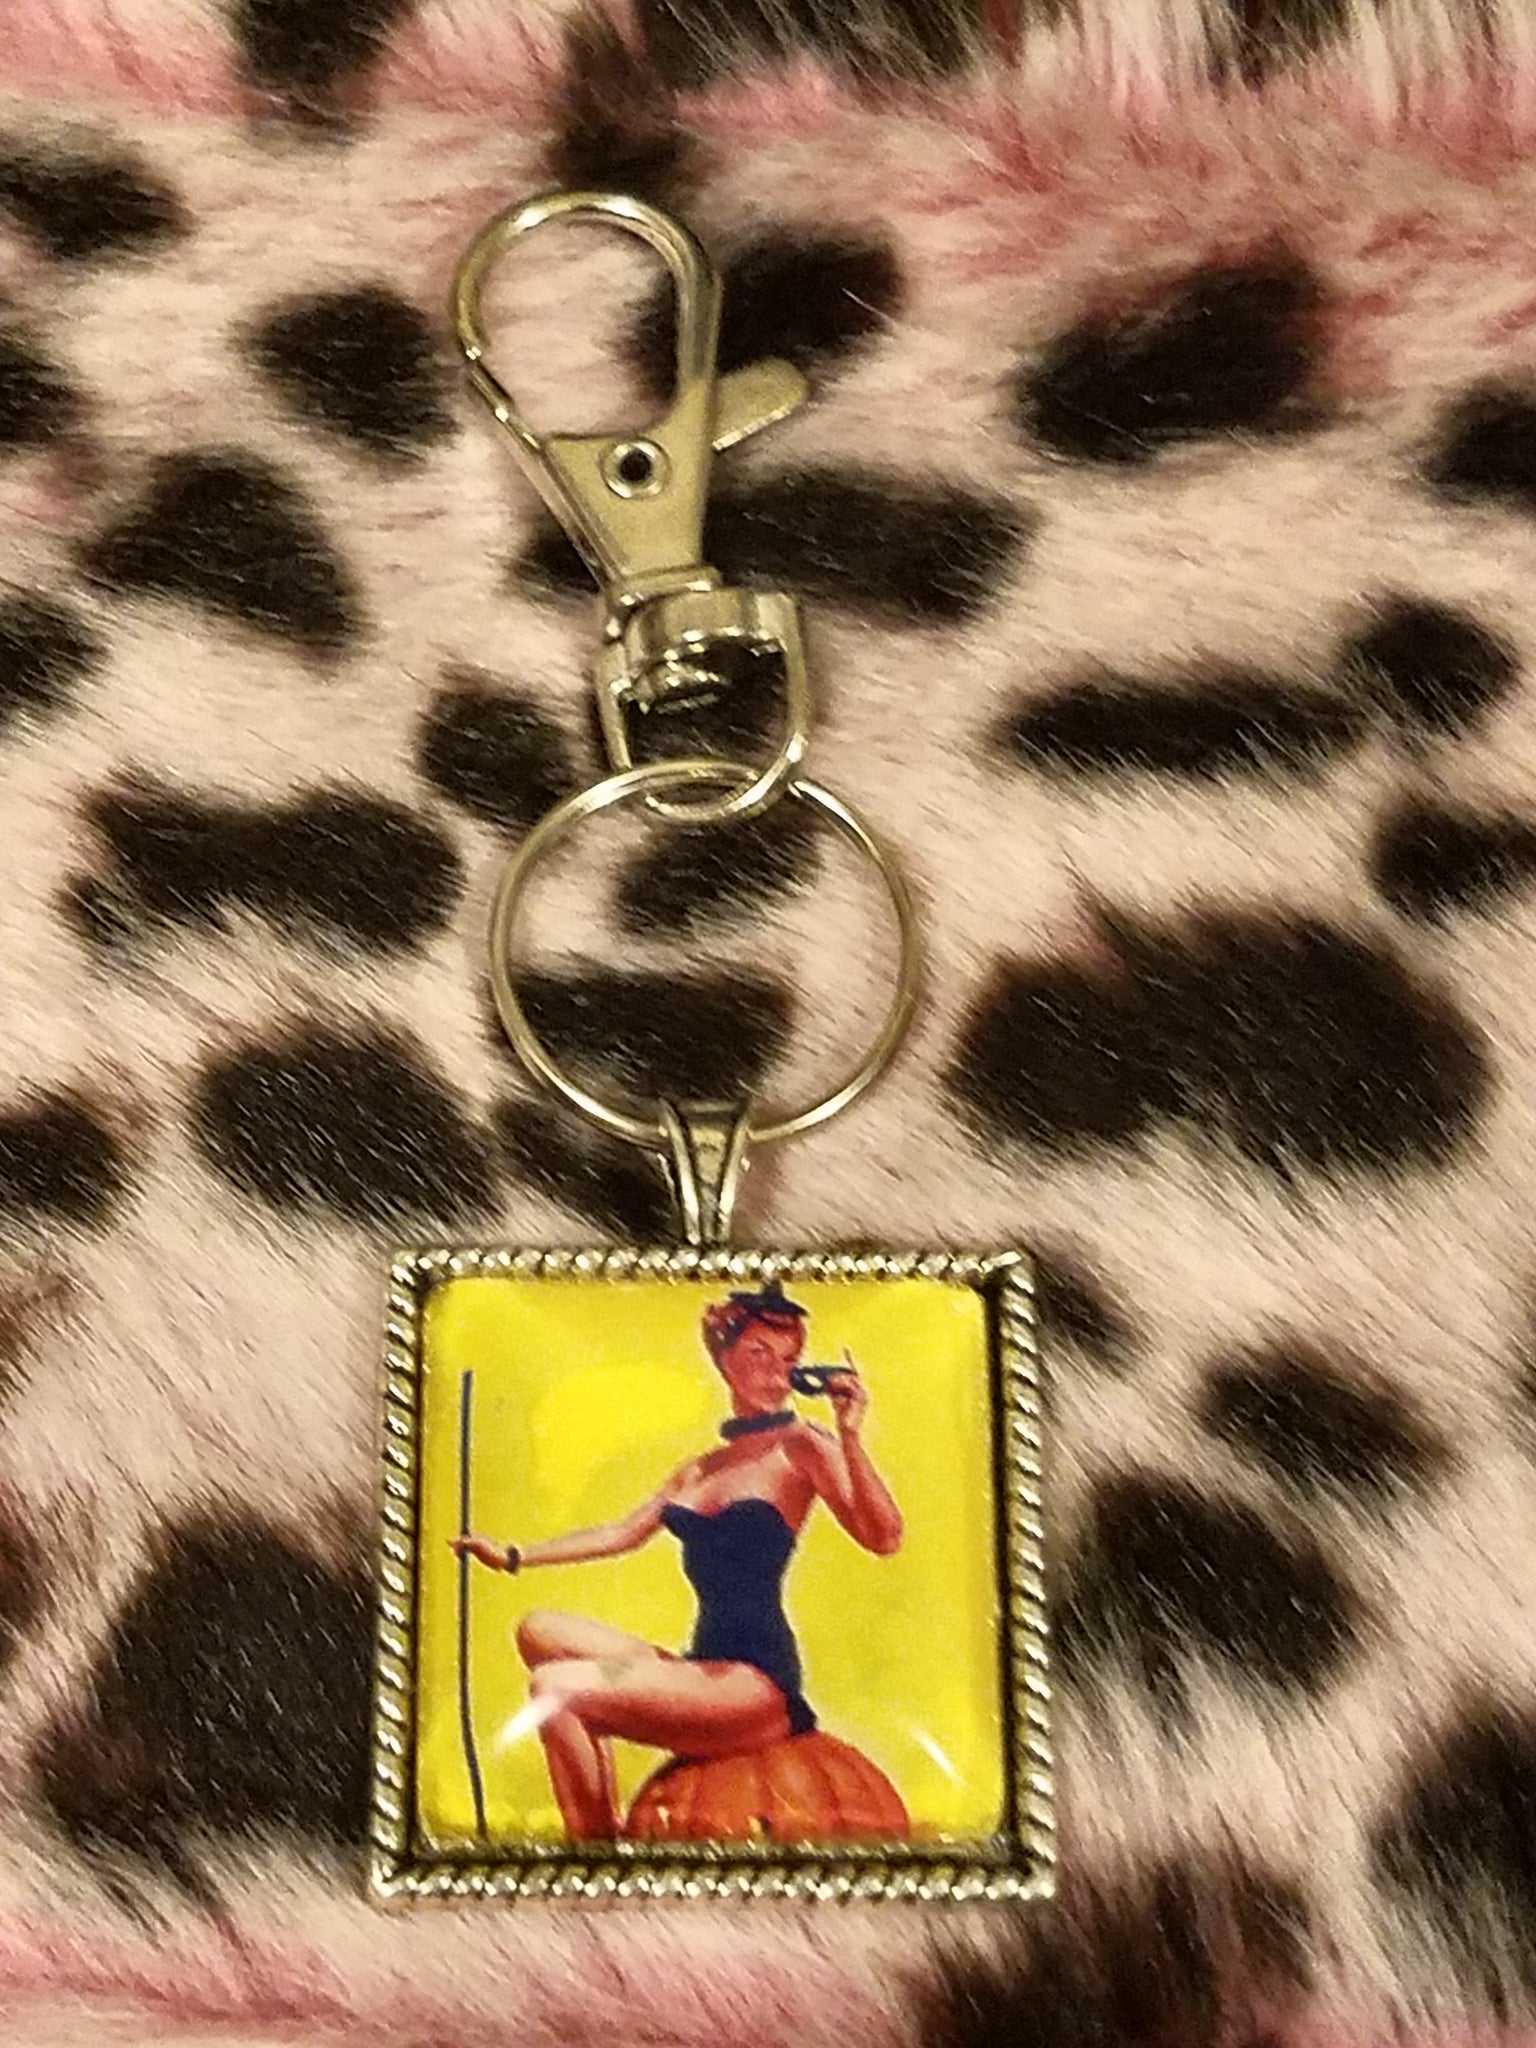 1" Vintage Halloween Pin Up Cabochon Key Chain